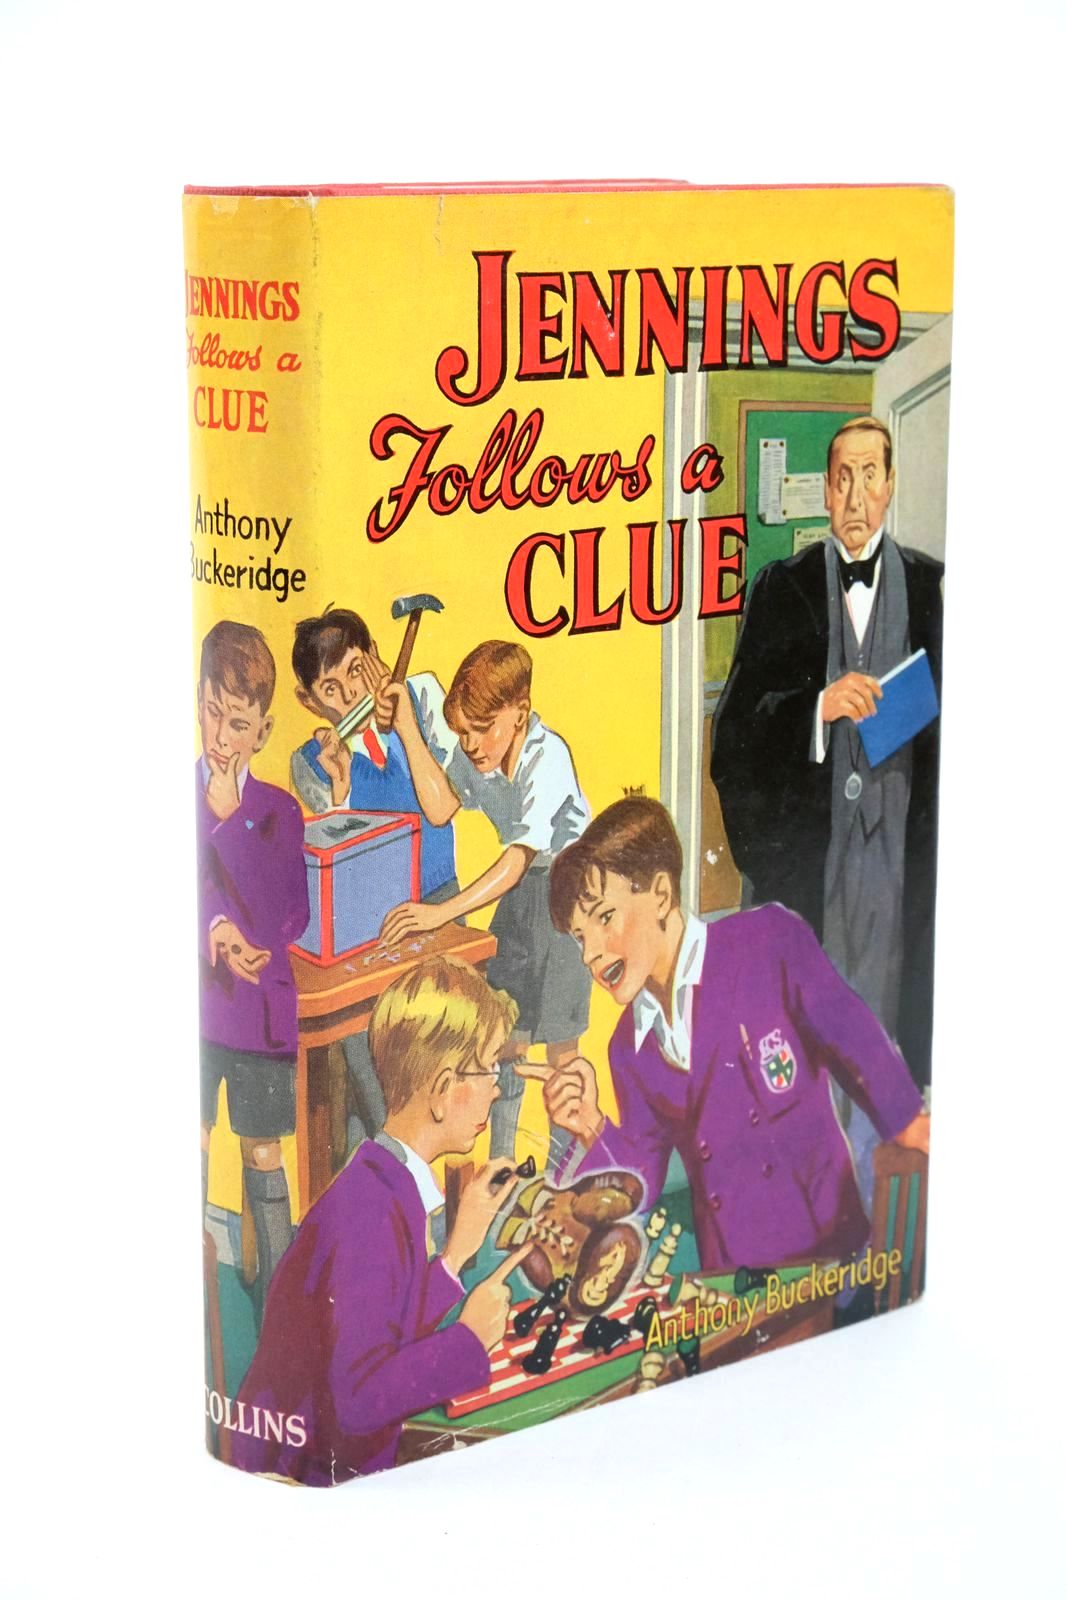 Photo of JENNINGS FOLLOWS A CLUE written by Buckeridge, Anthony published by Collins (STOCK CODE: 1322790)  for sale by Stella & Rose's Books